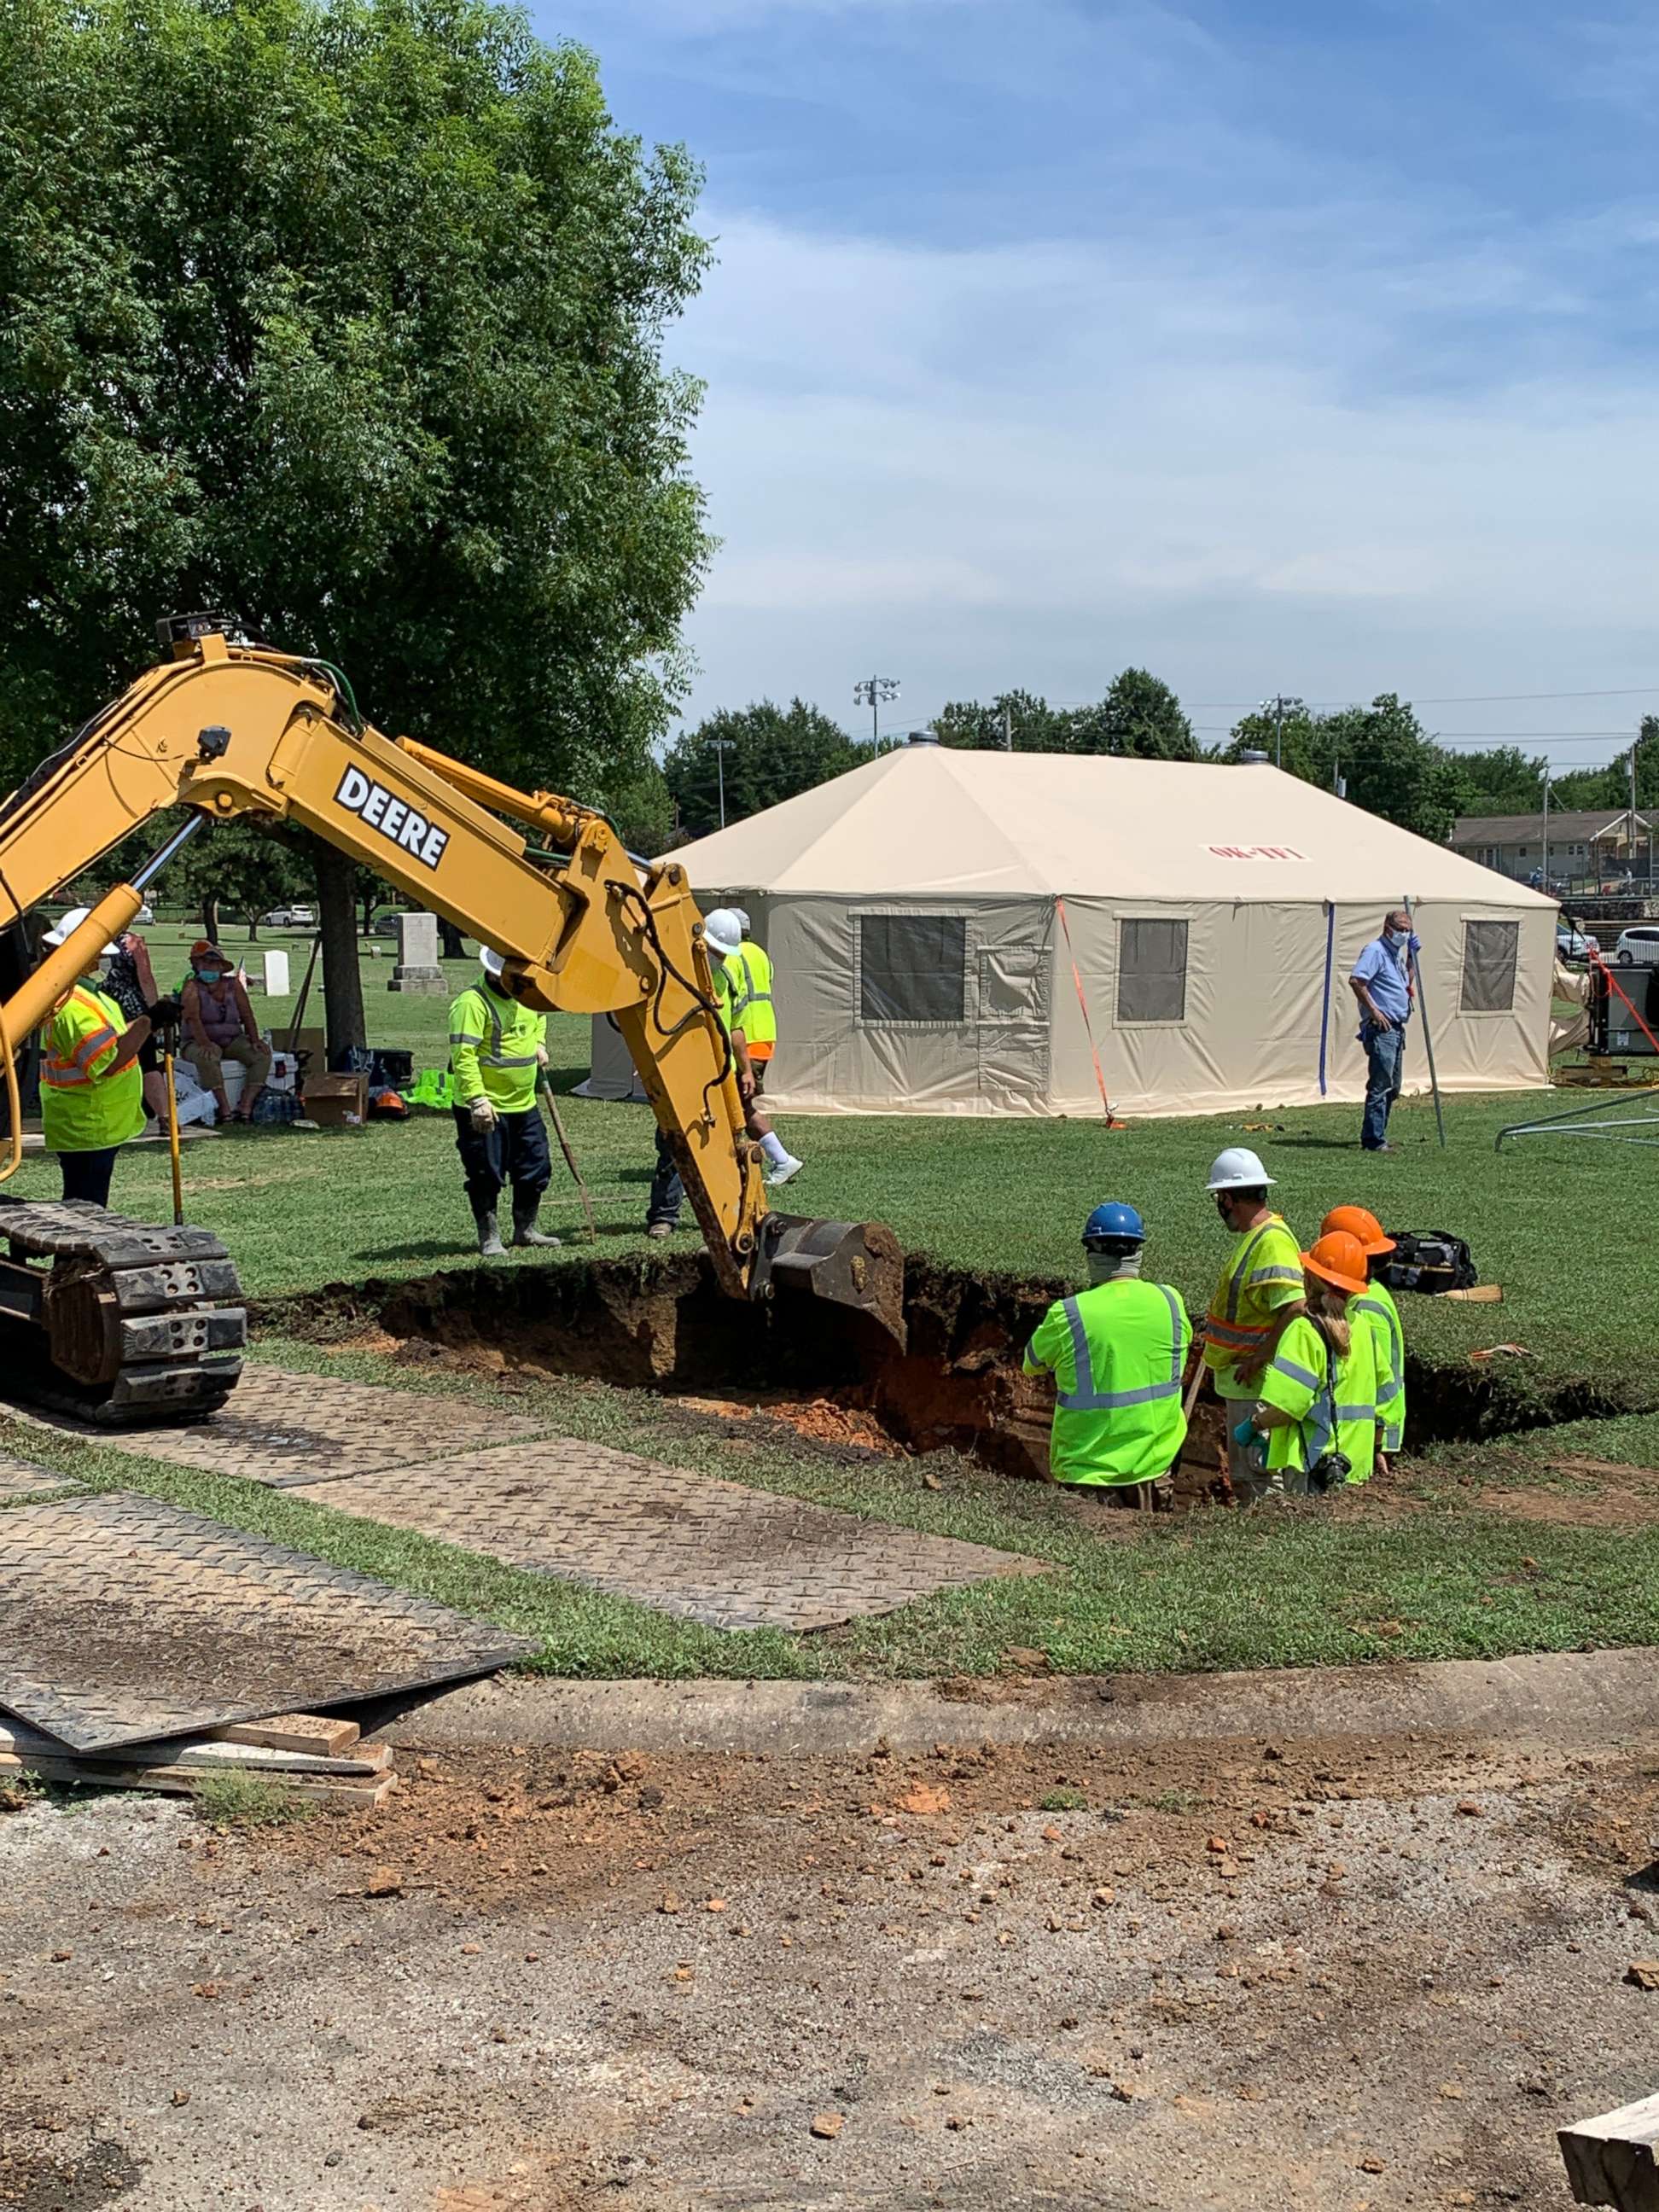 PHOTO: Workers break ground at Oaklawn Cemetery in north Tulsa, Okla., on July 13, 2020, searching for a potential mass grave of victims of the race massacre that occurred in this city in 1921.